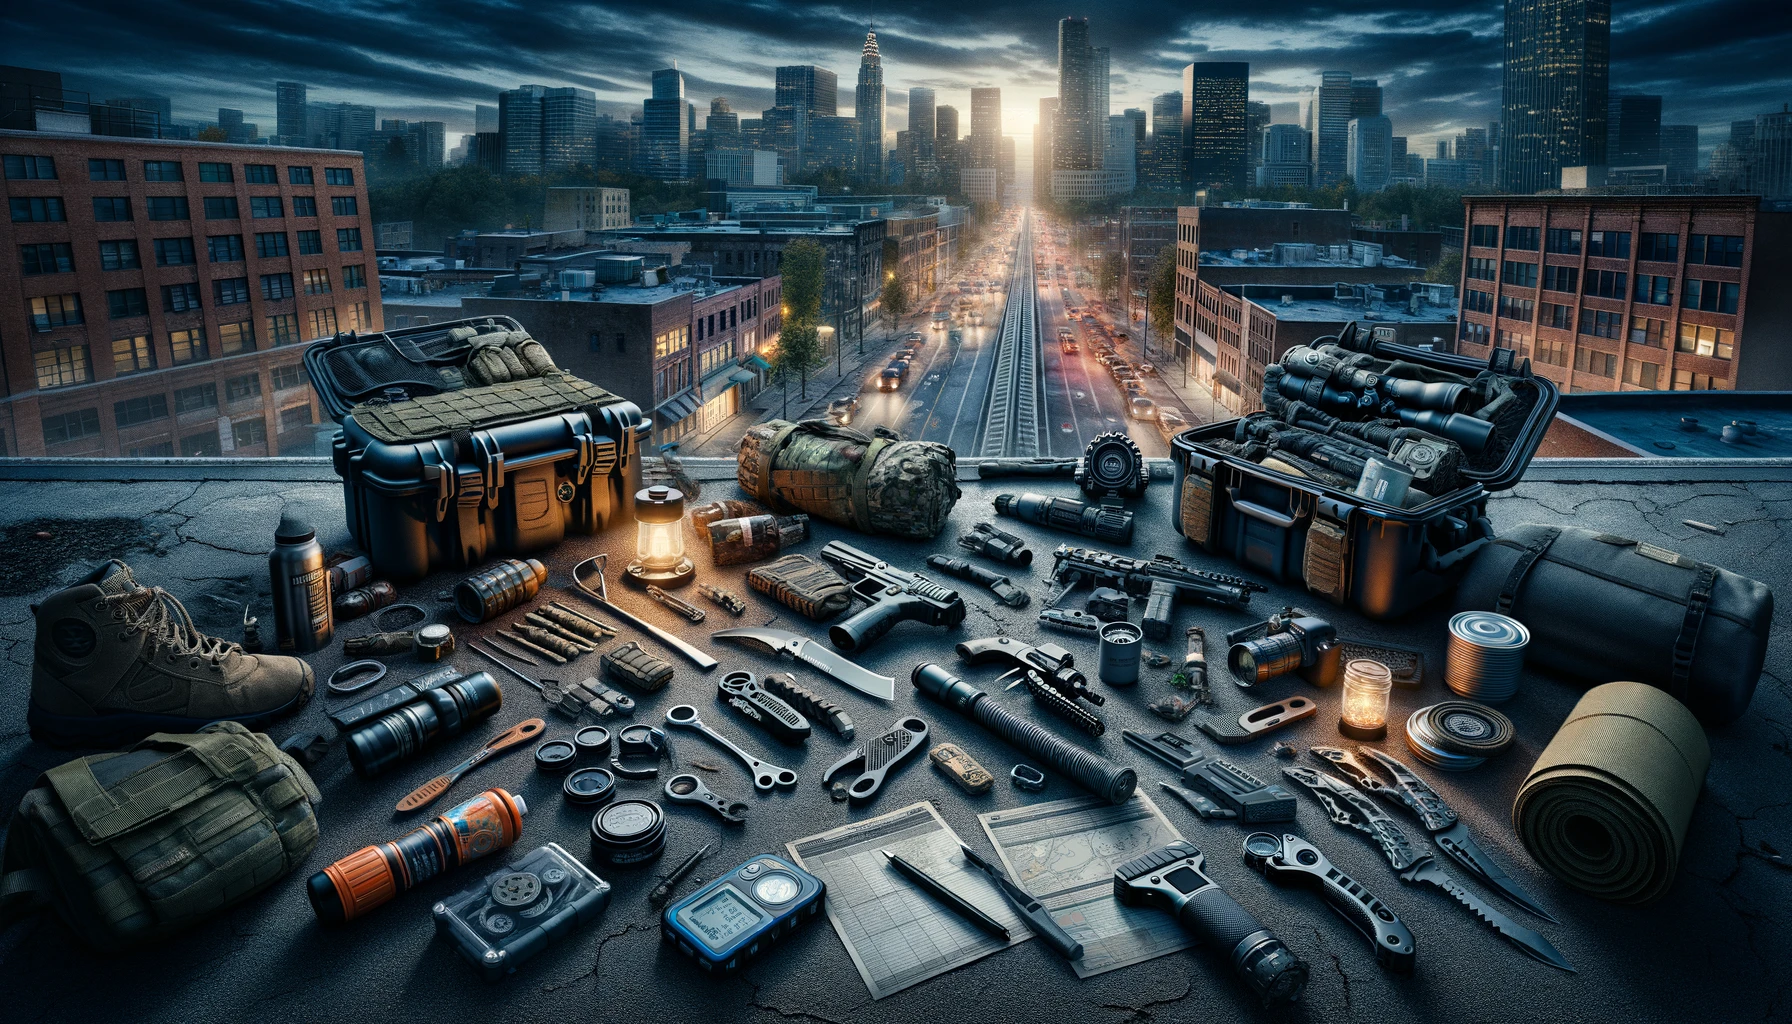 Prepper's survival gear meticulously arranged in an urban setting at twilight, showcasing advanced tools like water filtration system, multi-tool, and tactical flashlight, set against a cityscape, emphasizing urban readiness and high-quality equipment